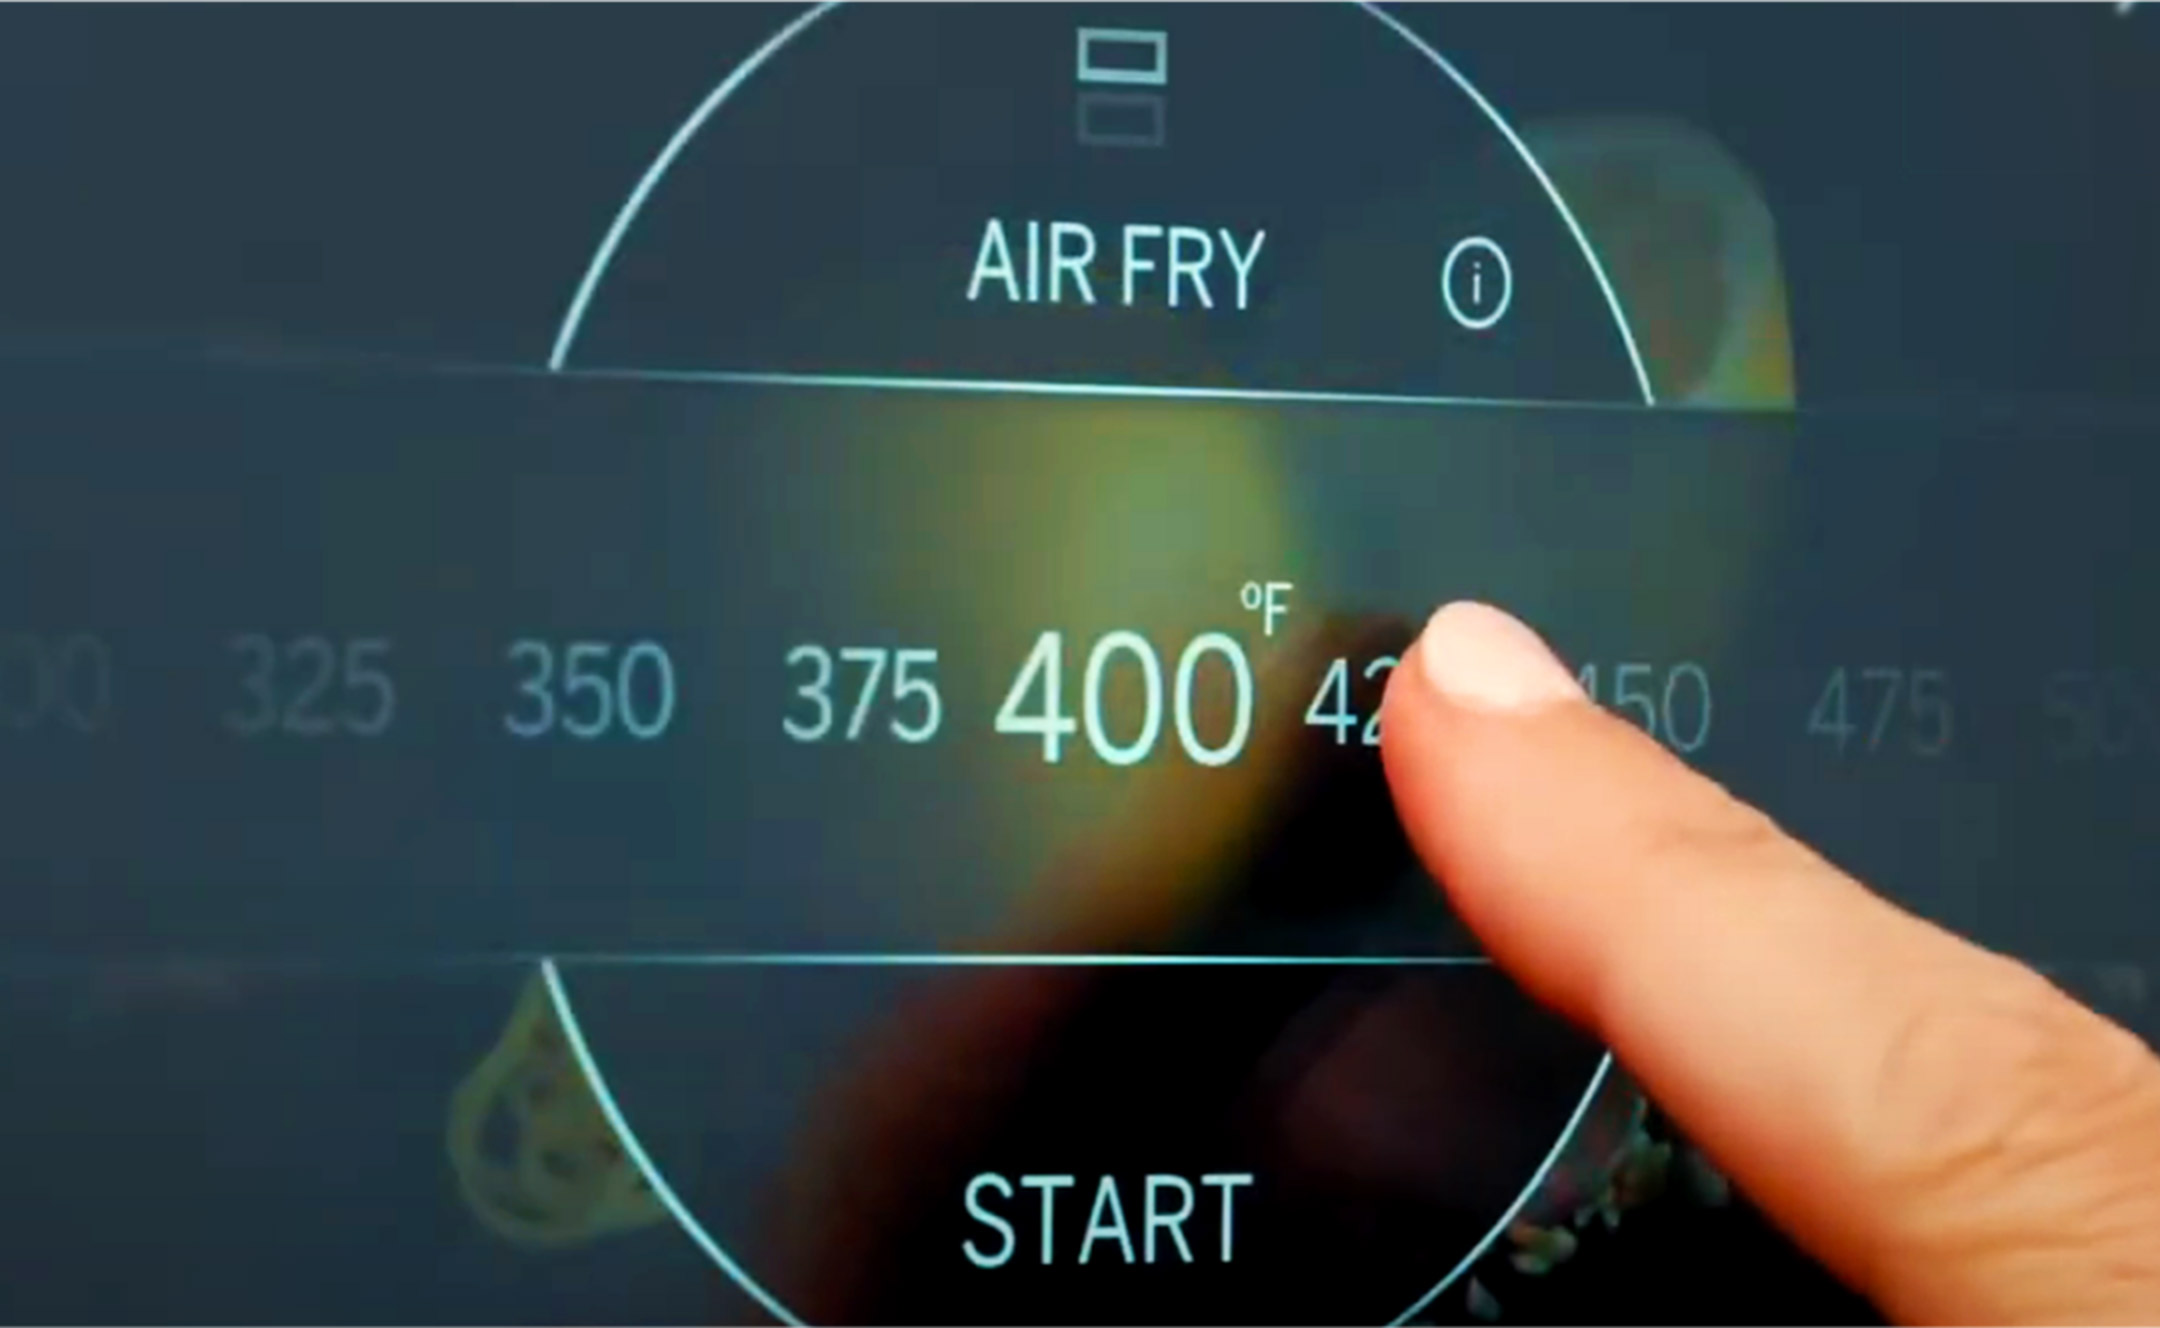 Air Fry Touch Control Panel